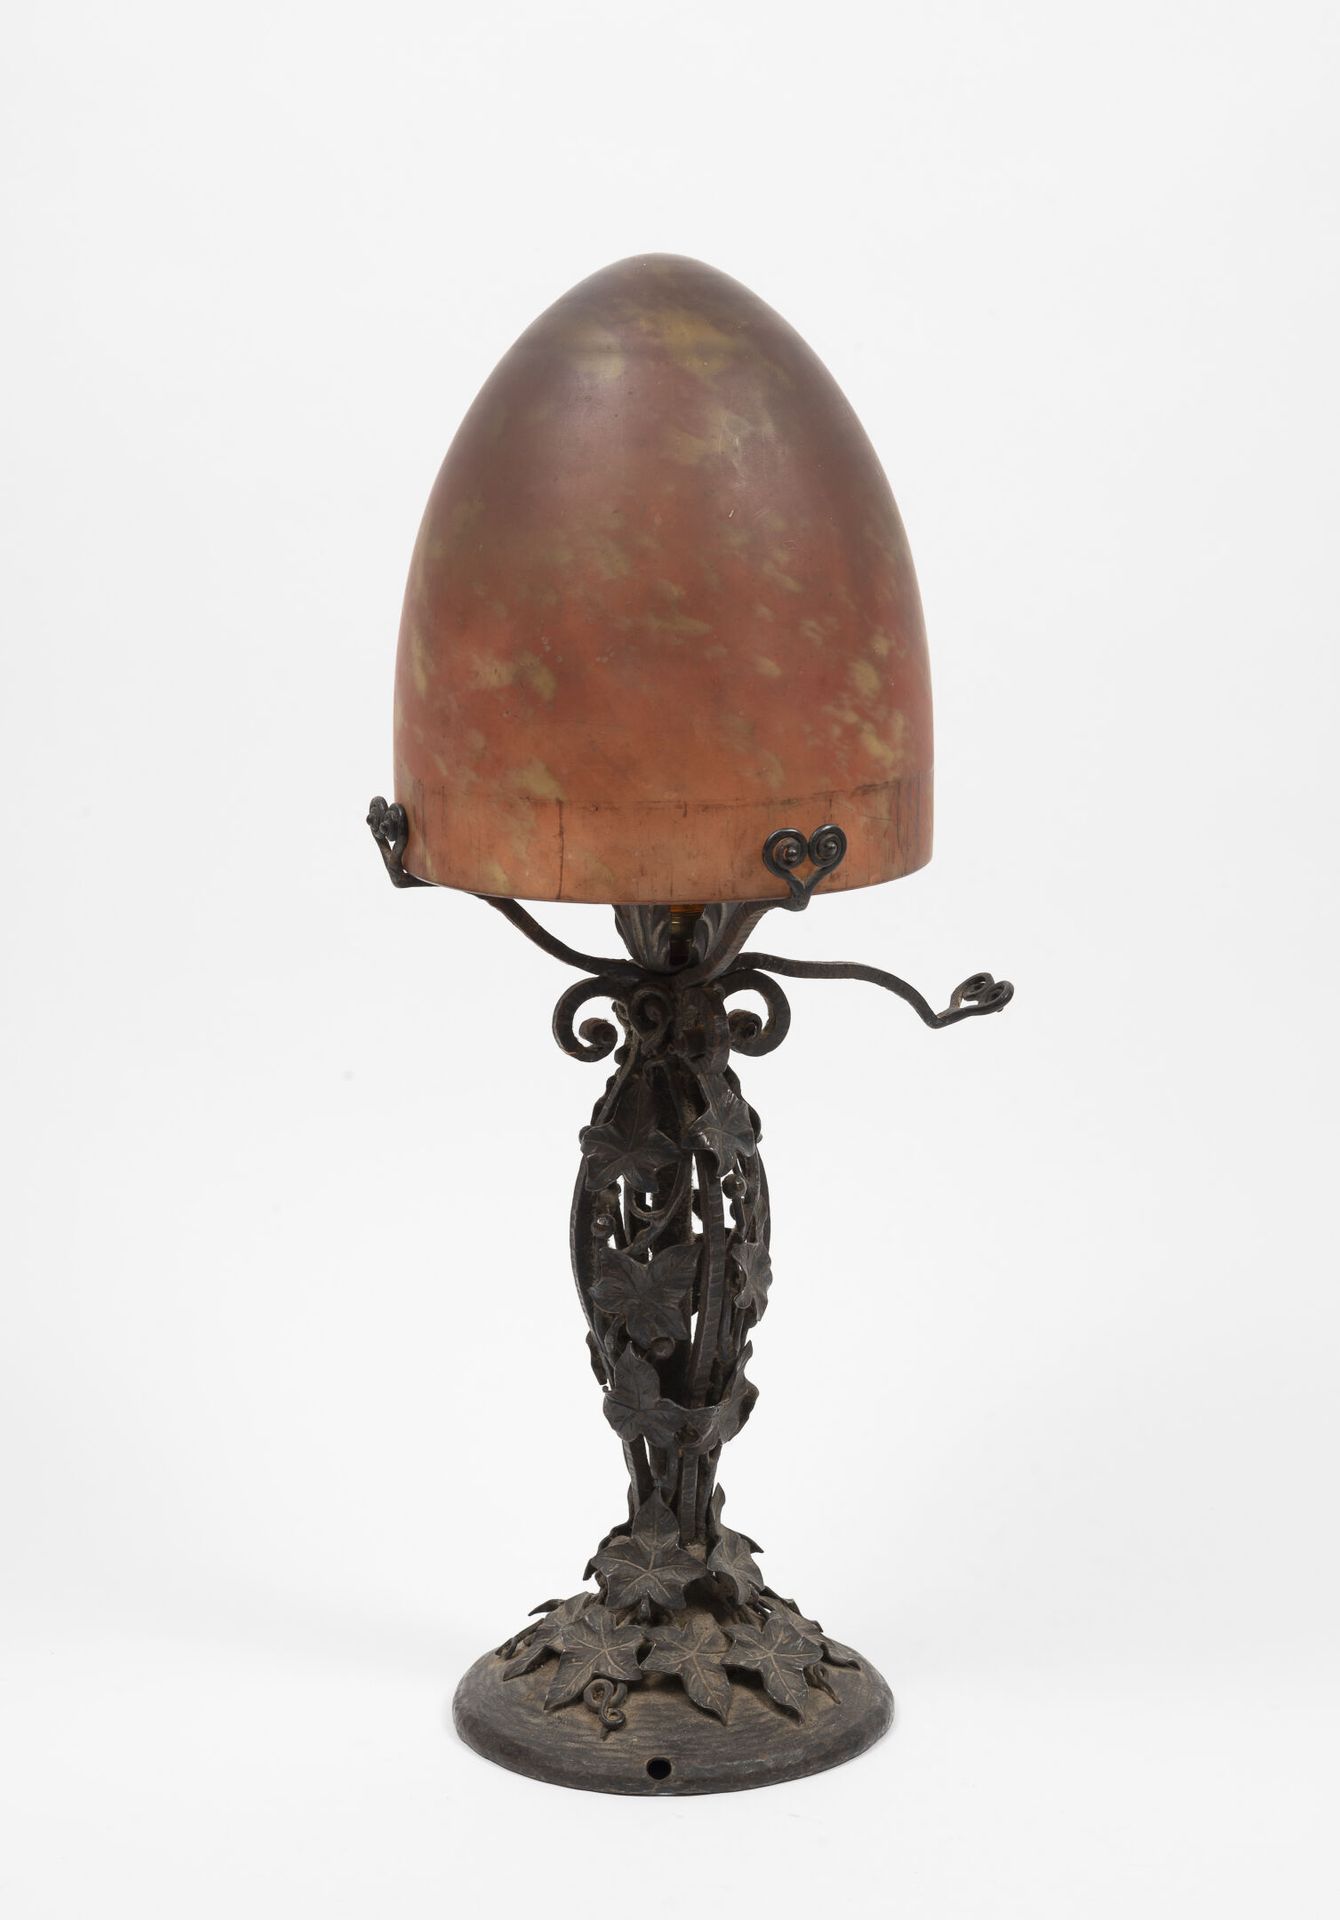 Lampe de salon The base in wrought iron decorated with ivy leaves.

The ovoid la&hellip;